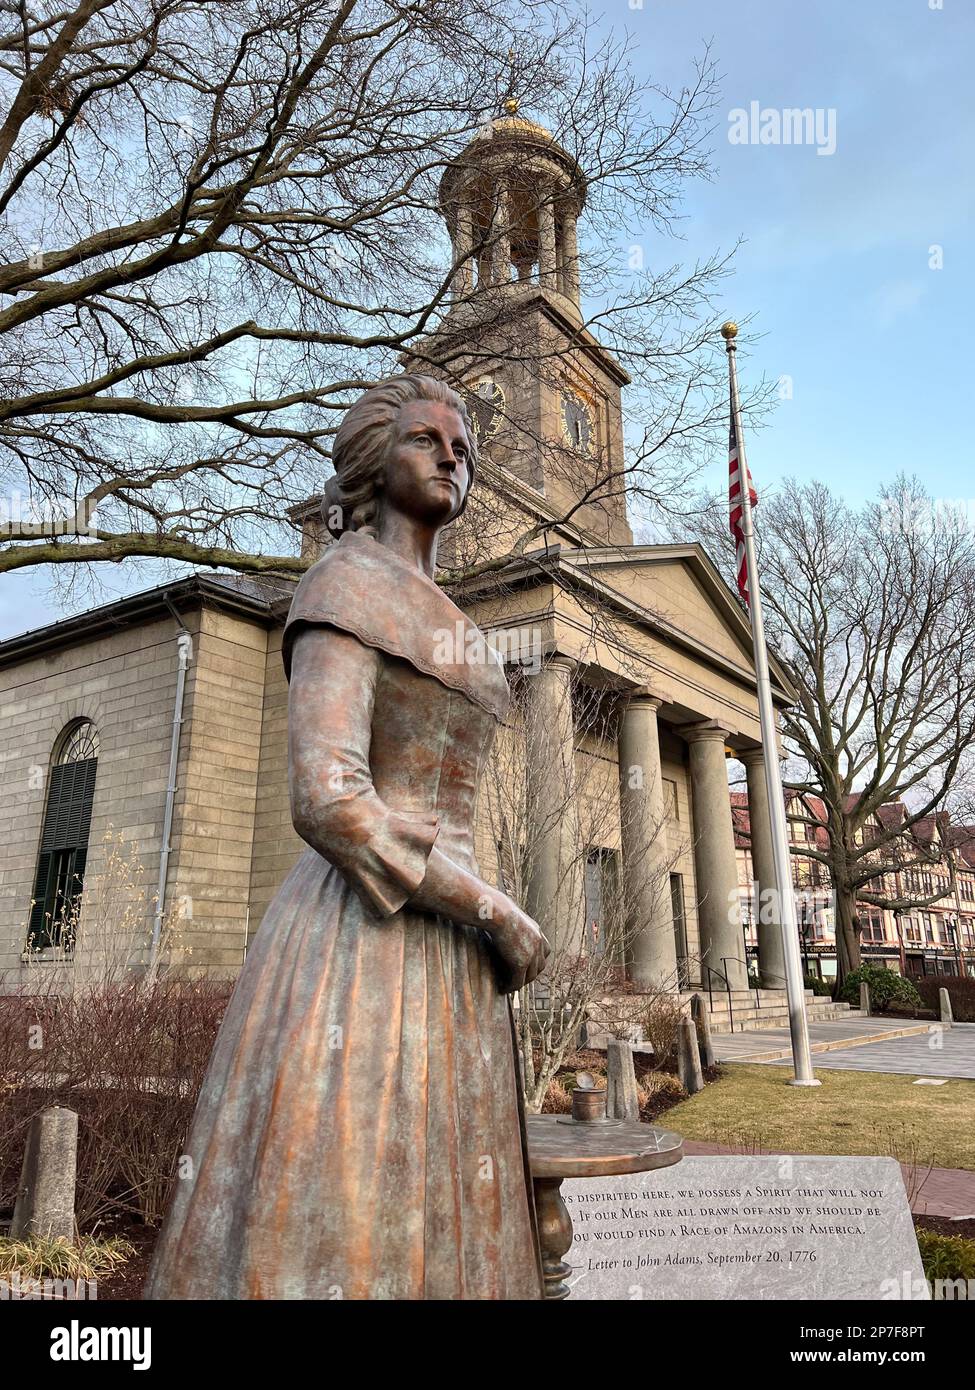 Abigail Adams statue sculpted by Sergey Eylanbekov in Quincy Massachusetts. Stock Photo